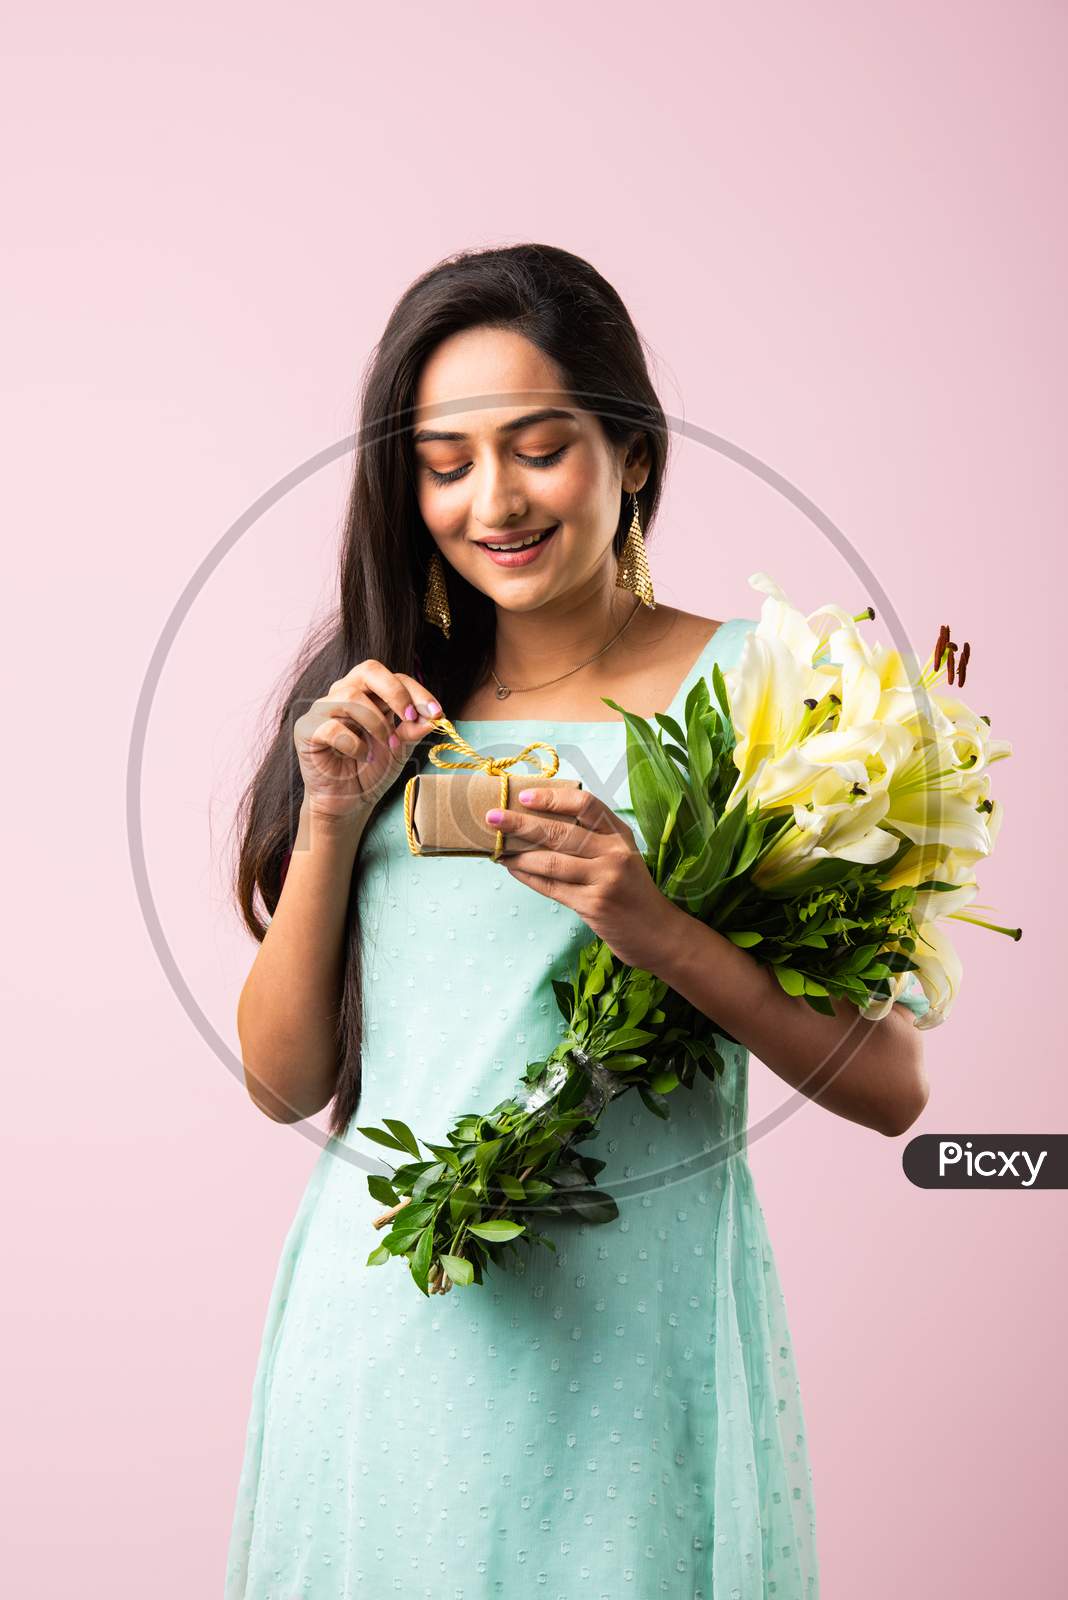 Indian Pretty Girl Opens Gift While Holding Flower Bouquet